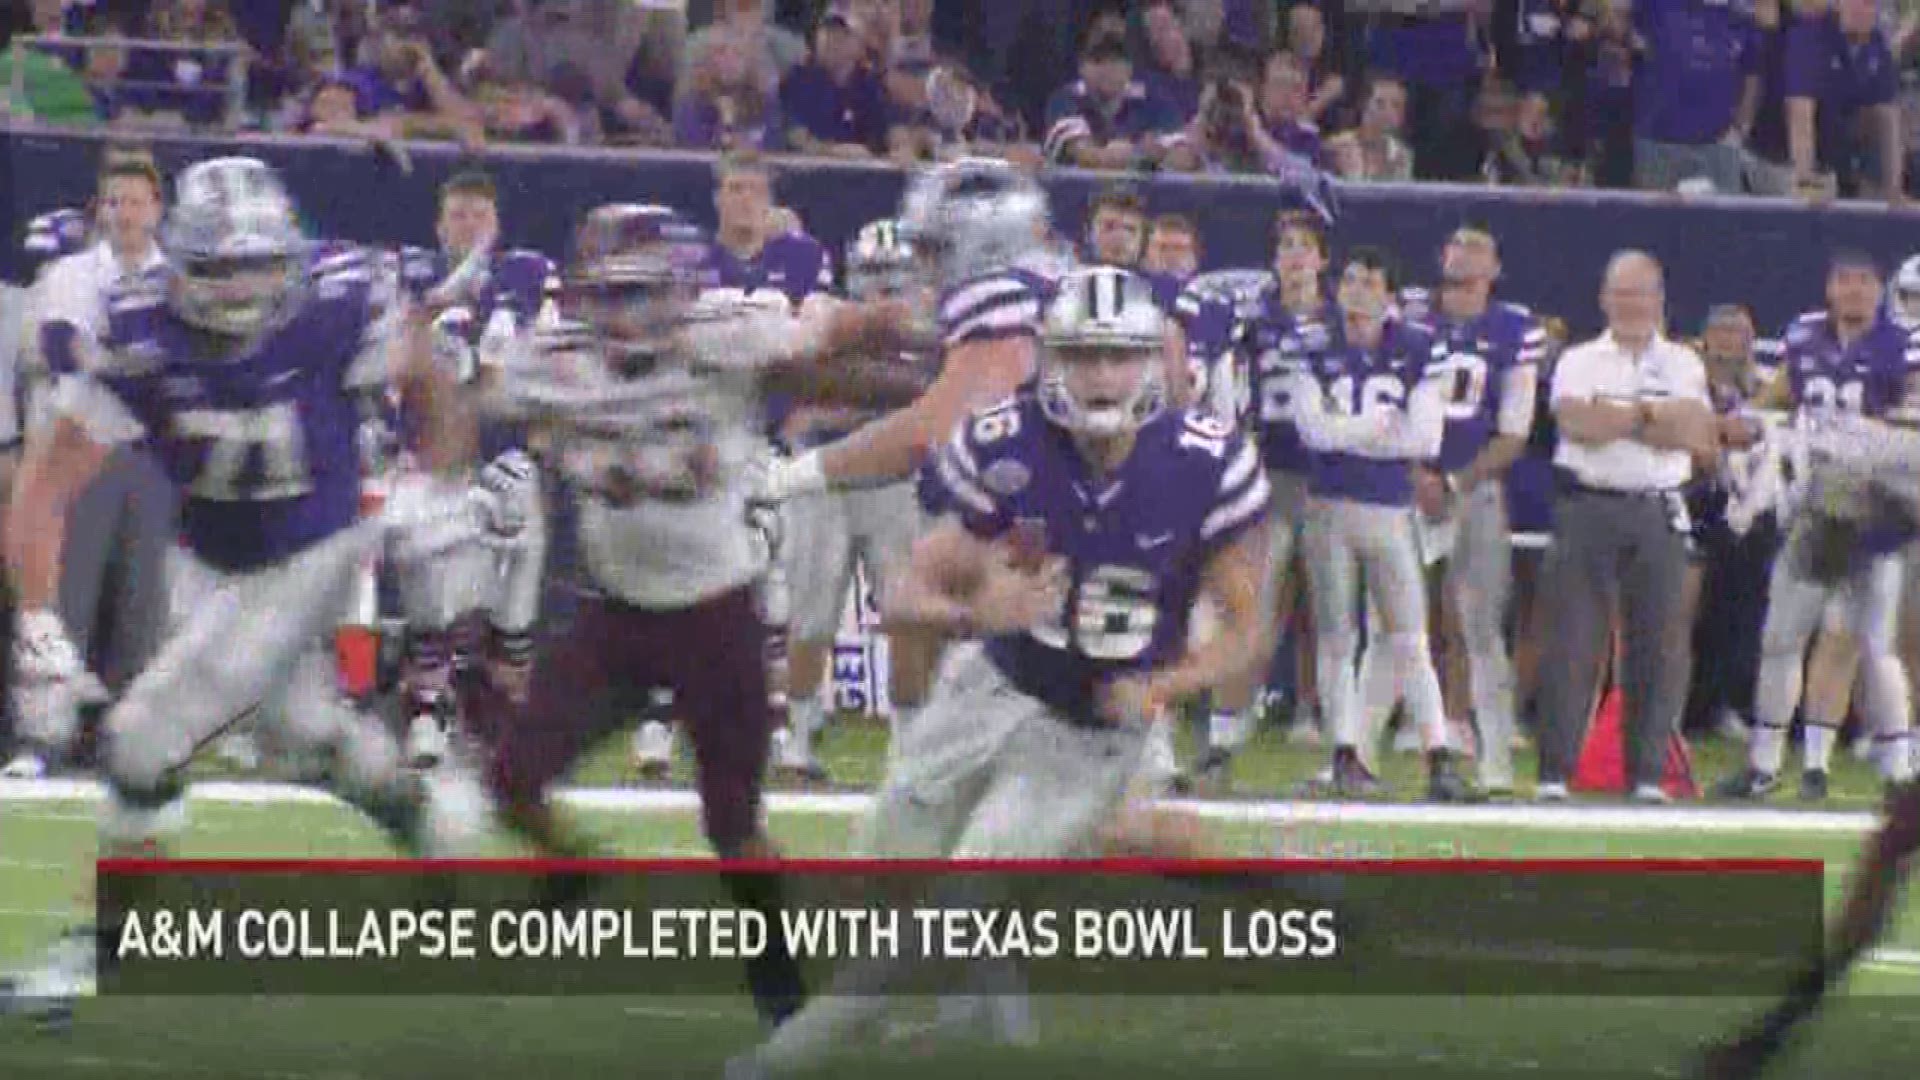 Jesse Ertz accounted for three touchdowns for Kansas State as the Wildcats gave the Aggies a 33-28 loss.